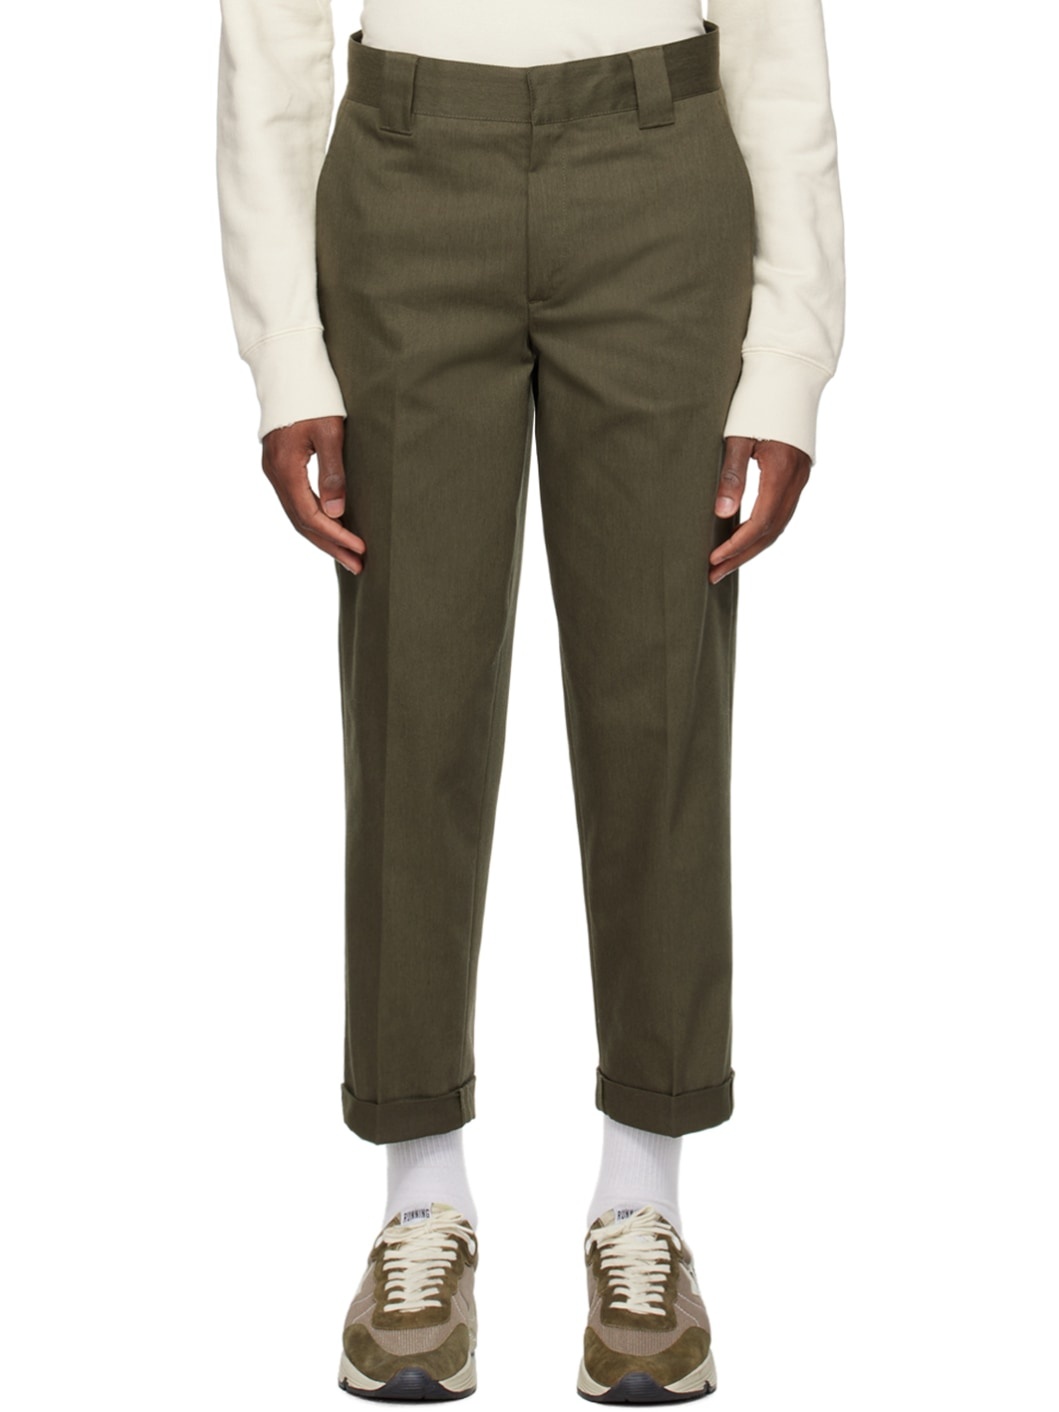 Men’s pants in beige and brown wool and silk blend fabric